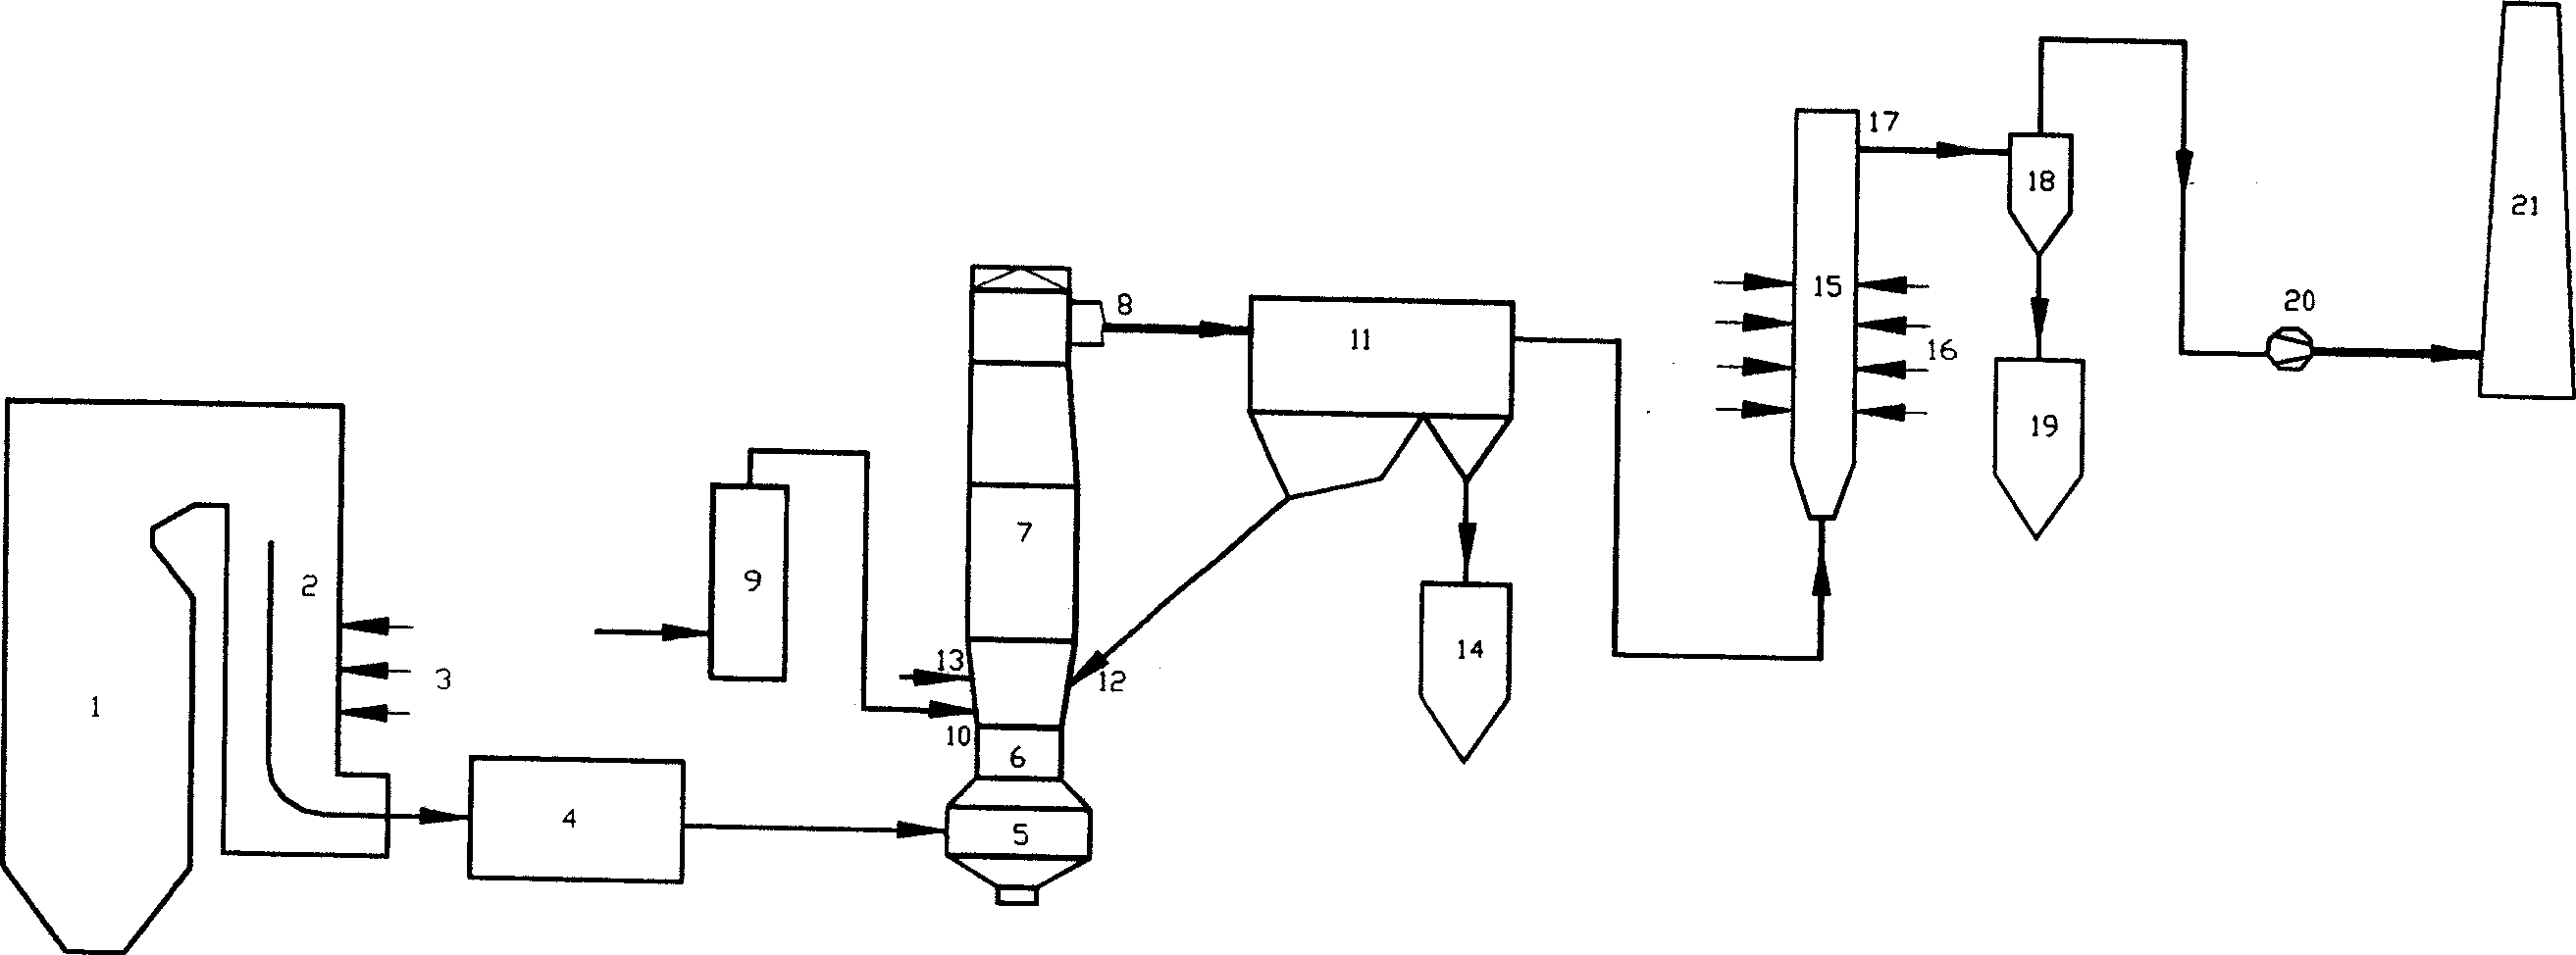 Dry smoke cleaning process for desulfurizing and denitrating simultaneously and its system